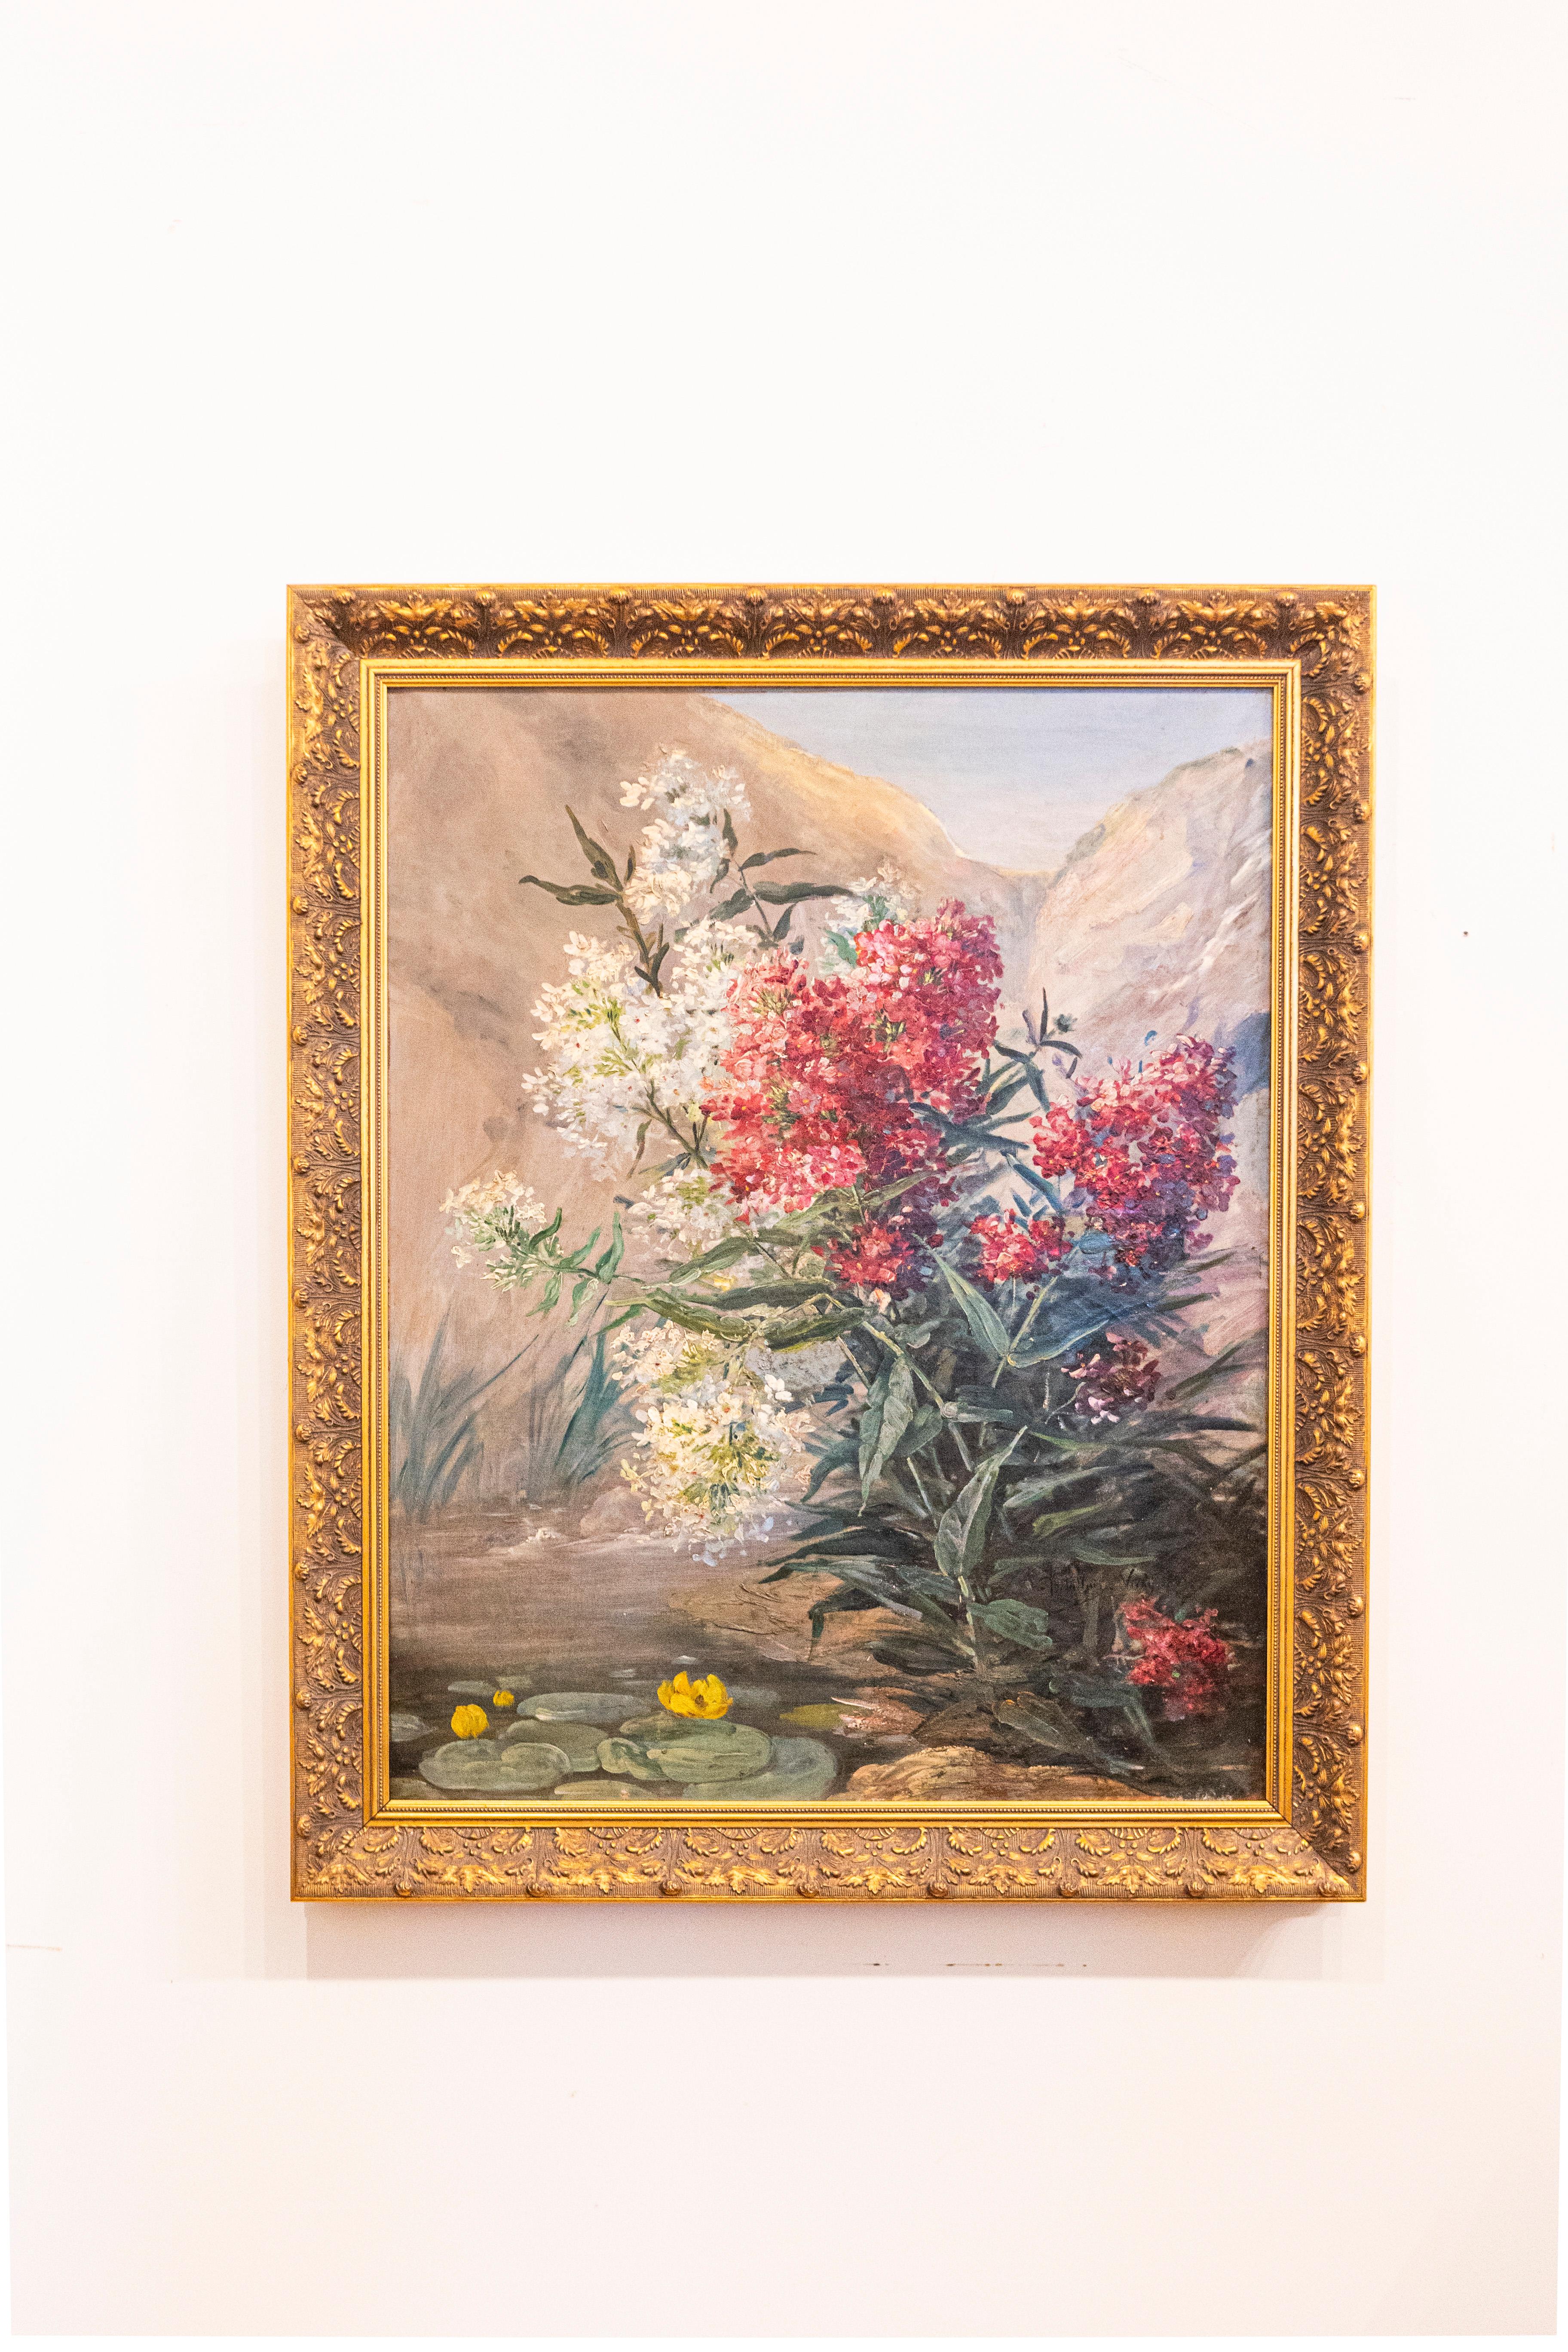 A French framed oil on canvas still-life painting from the late 19th century depicting a bouquet of flowers in a landscape. Born in France during the later years of the 19th century, this signed oil on canvas painting features a colorful bouquet of